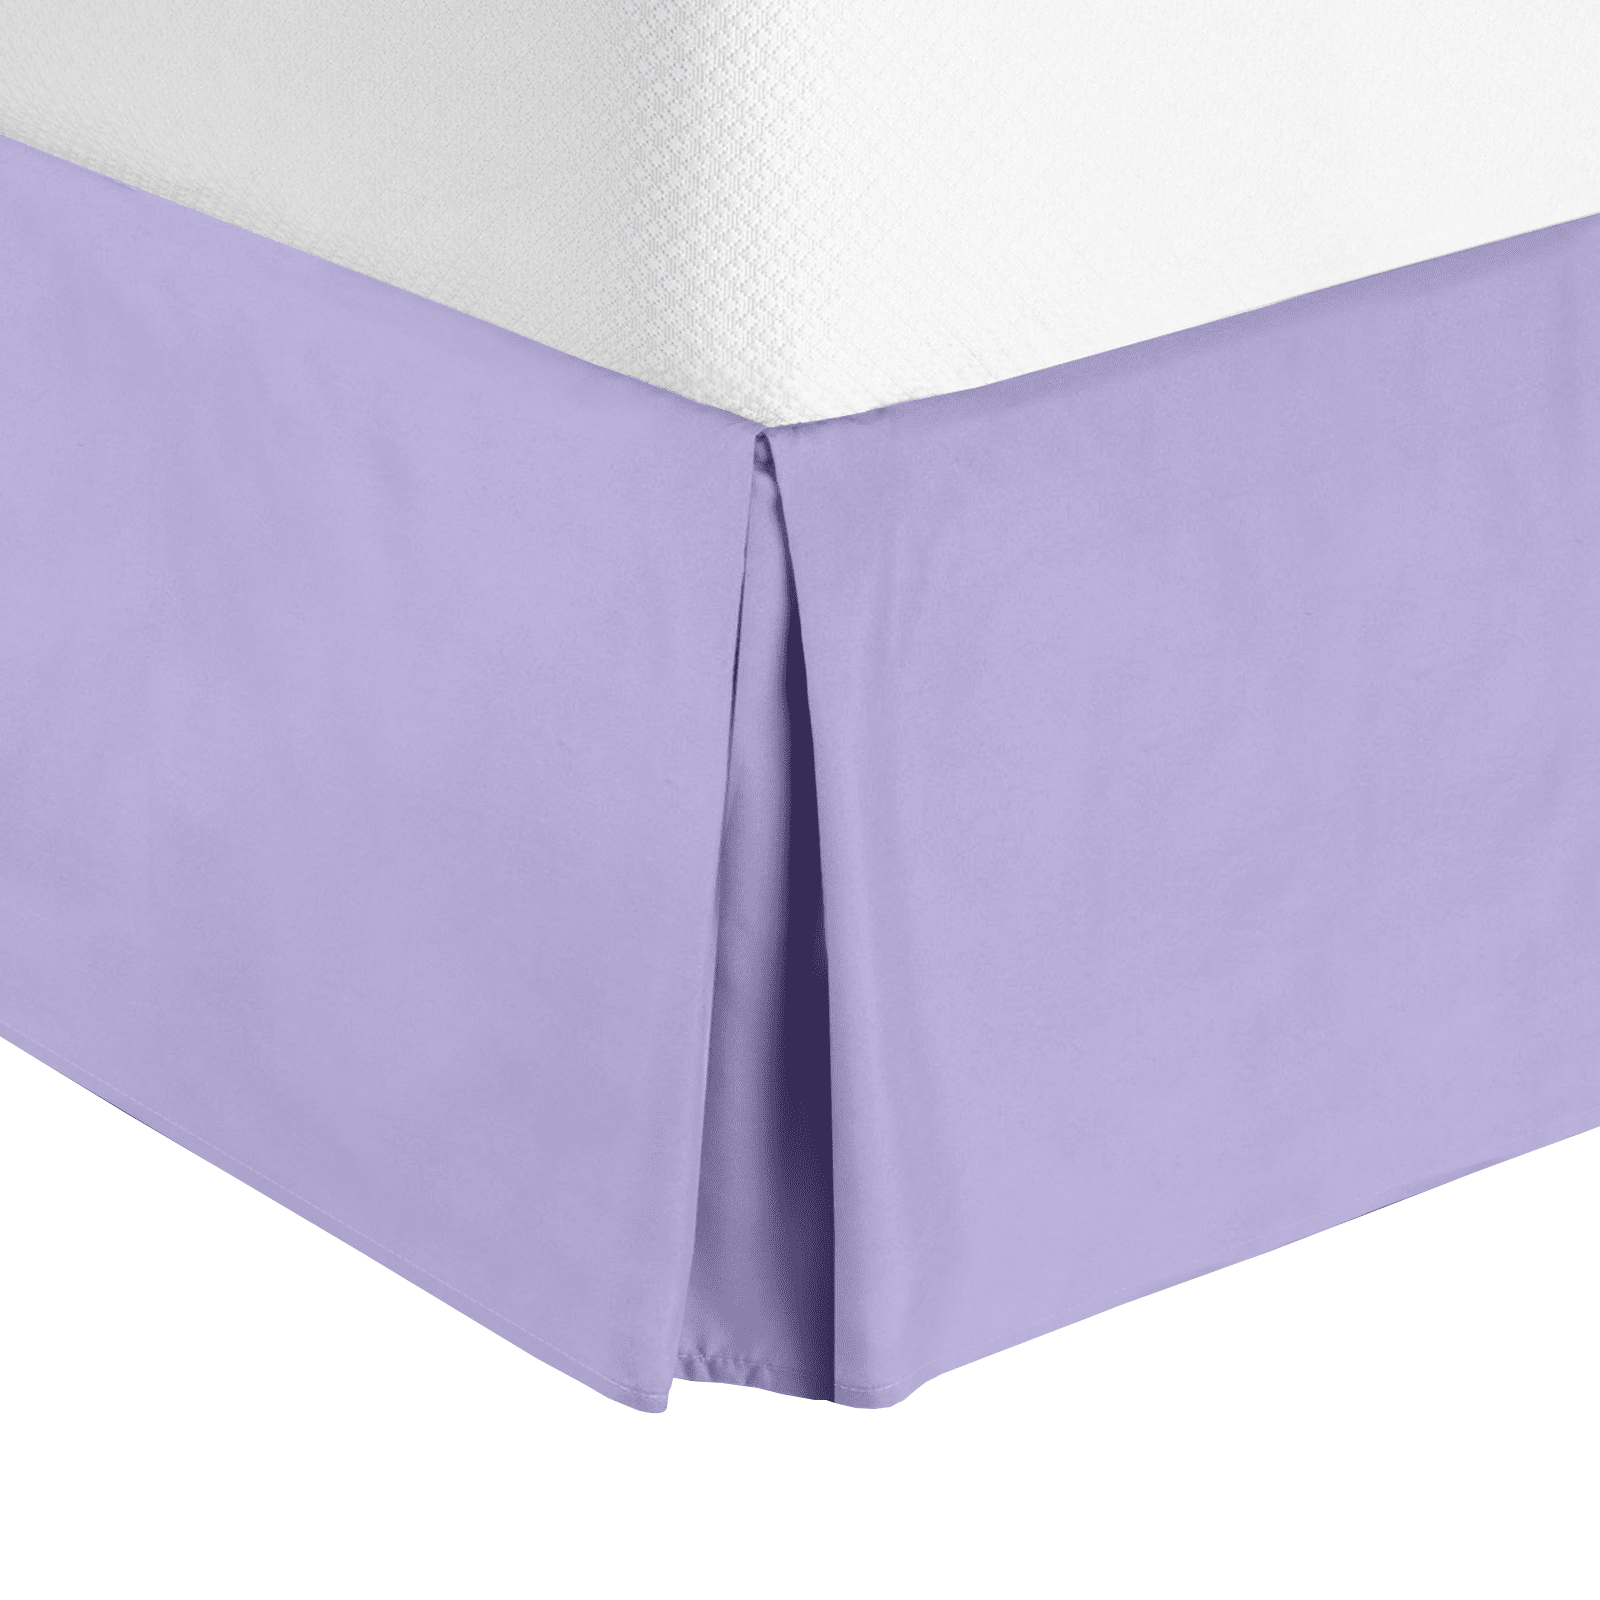 14" DROP SOLID EASY FIT SET UP PLEATED CORNERS 1 PC BED SKIRT LAVANDER FULL 